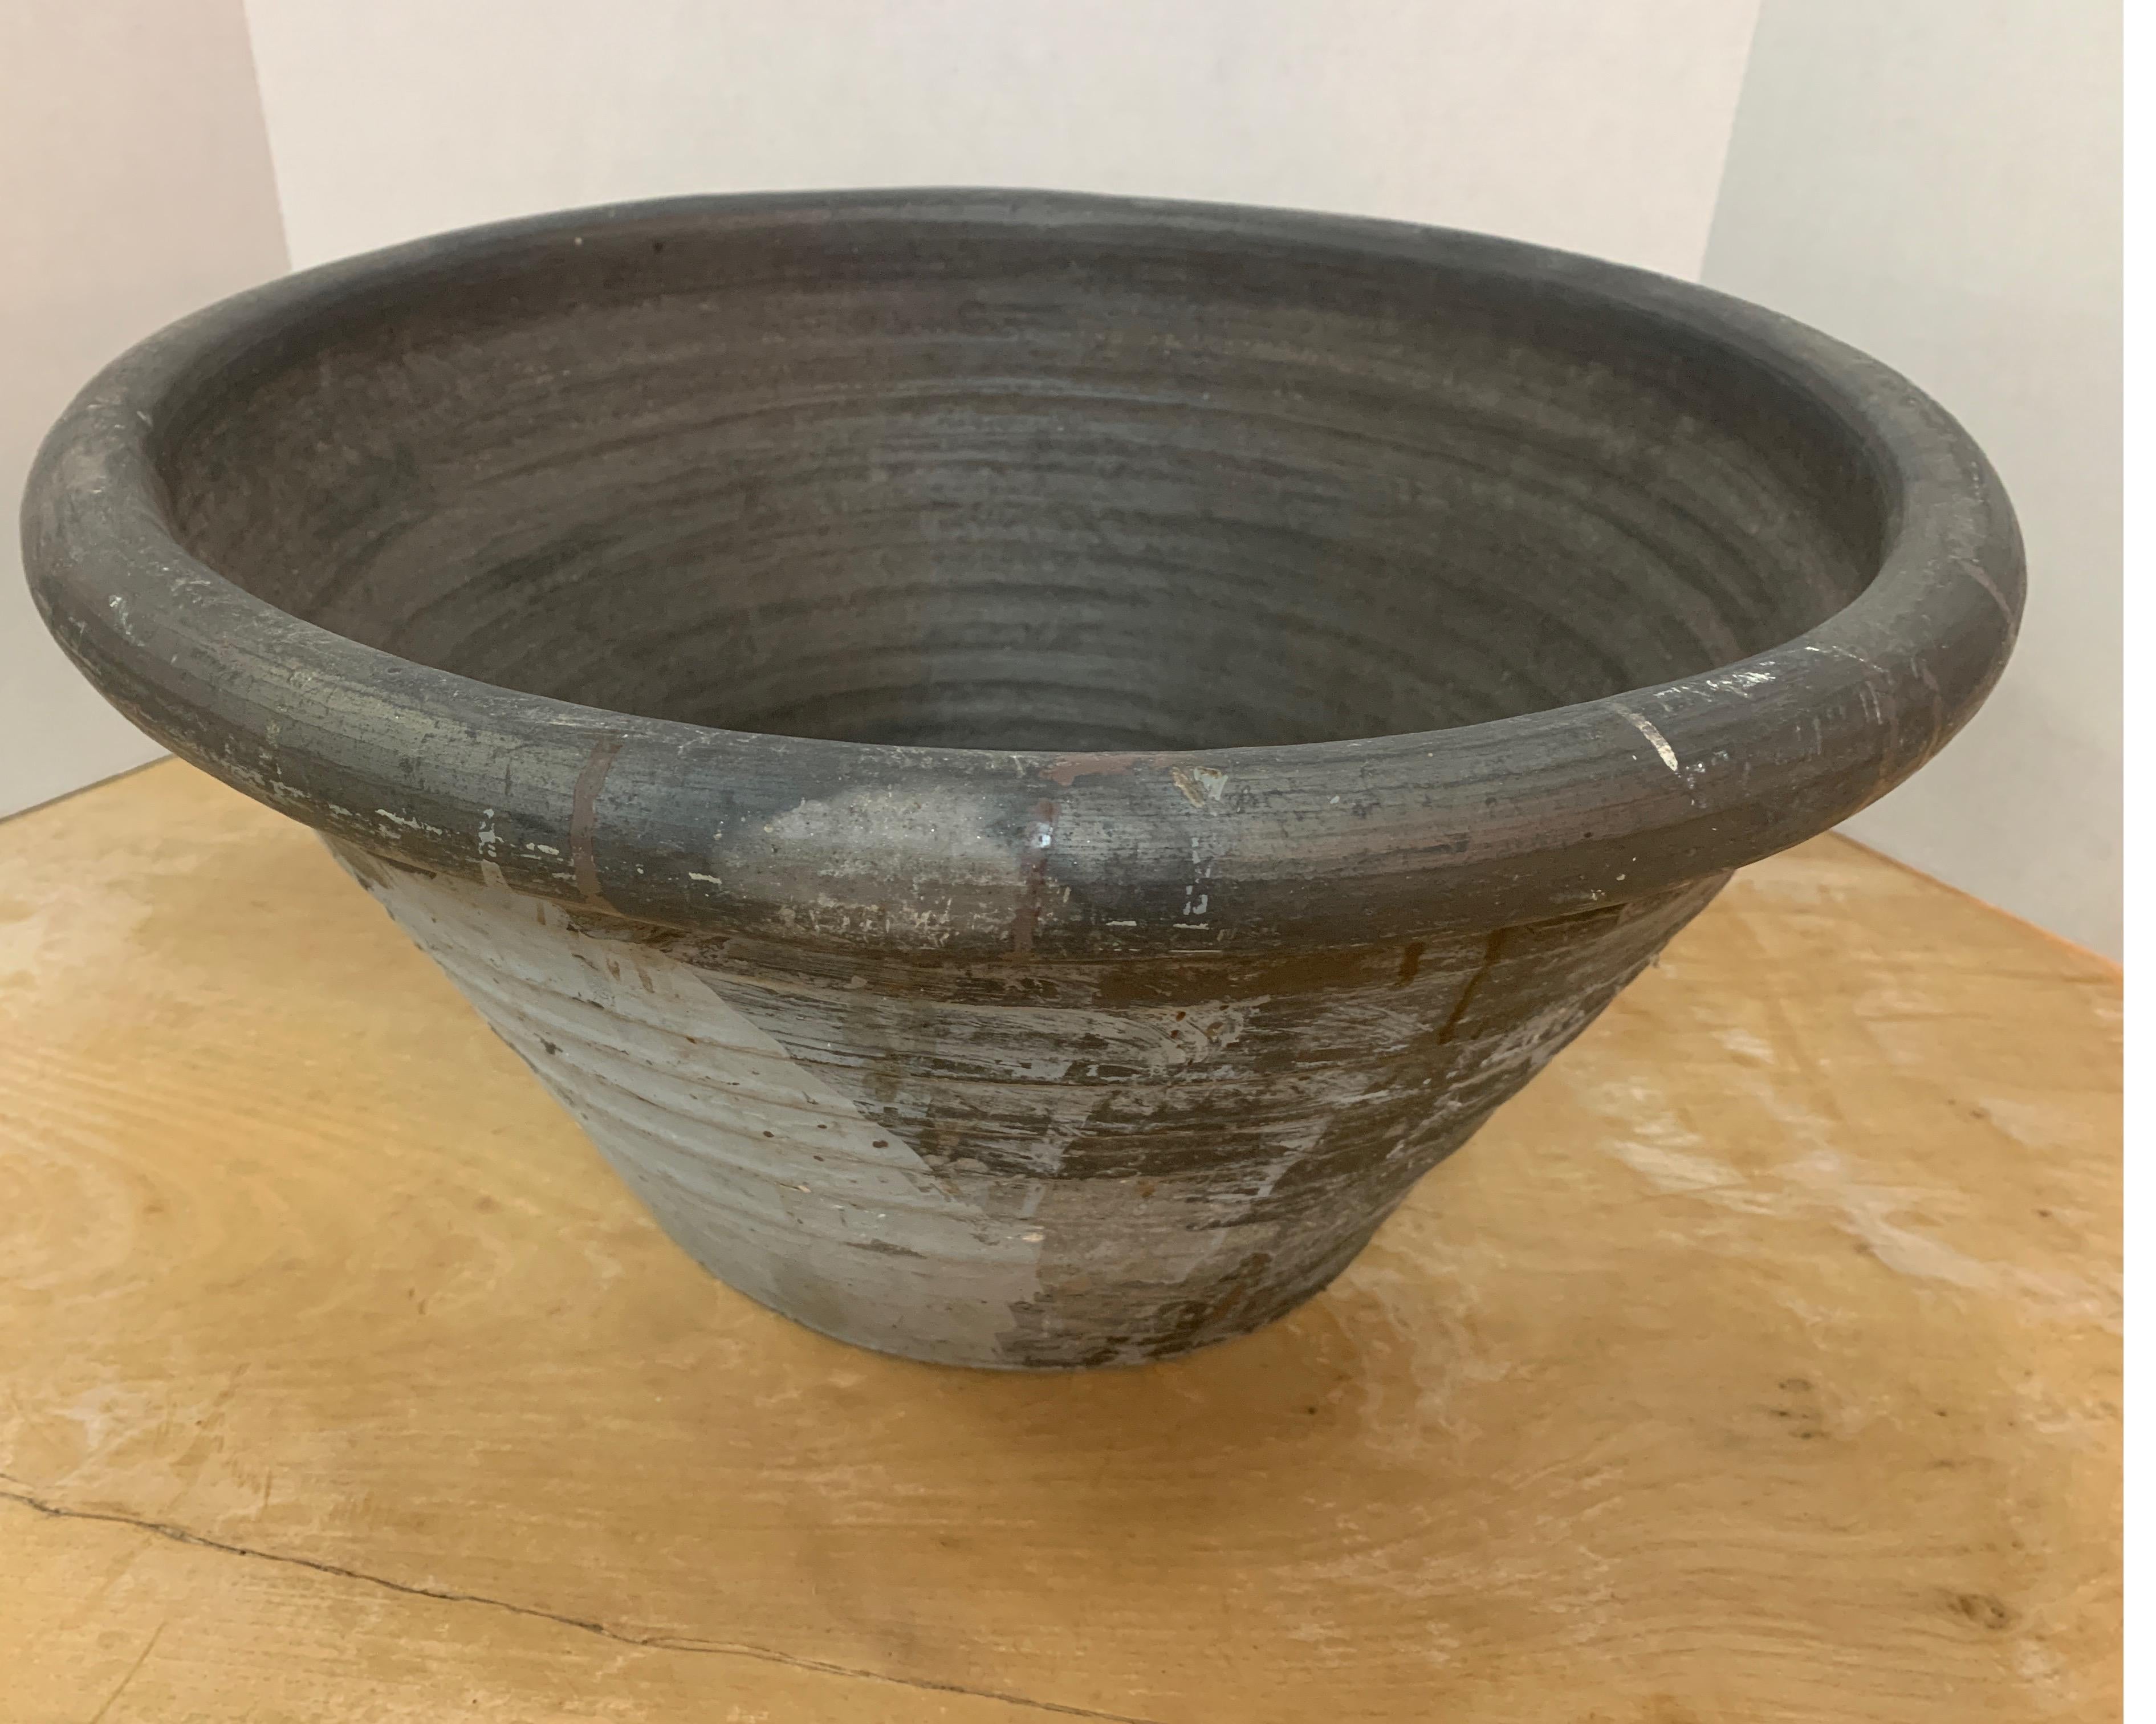 This is a great size bowl from Spain with double handles and great character. Perfect used in decoration as a sculpture or to place fruit inside.